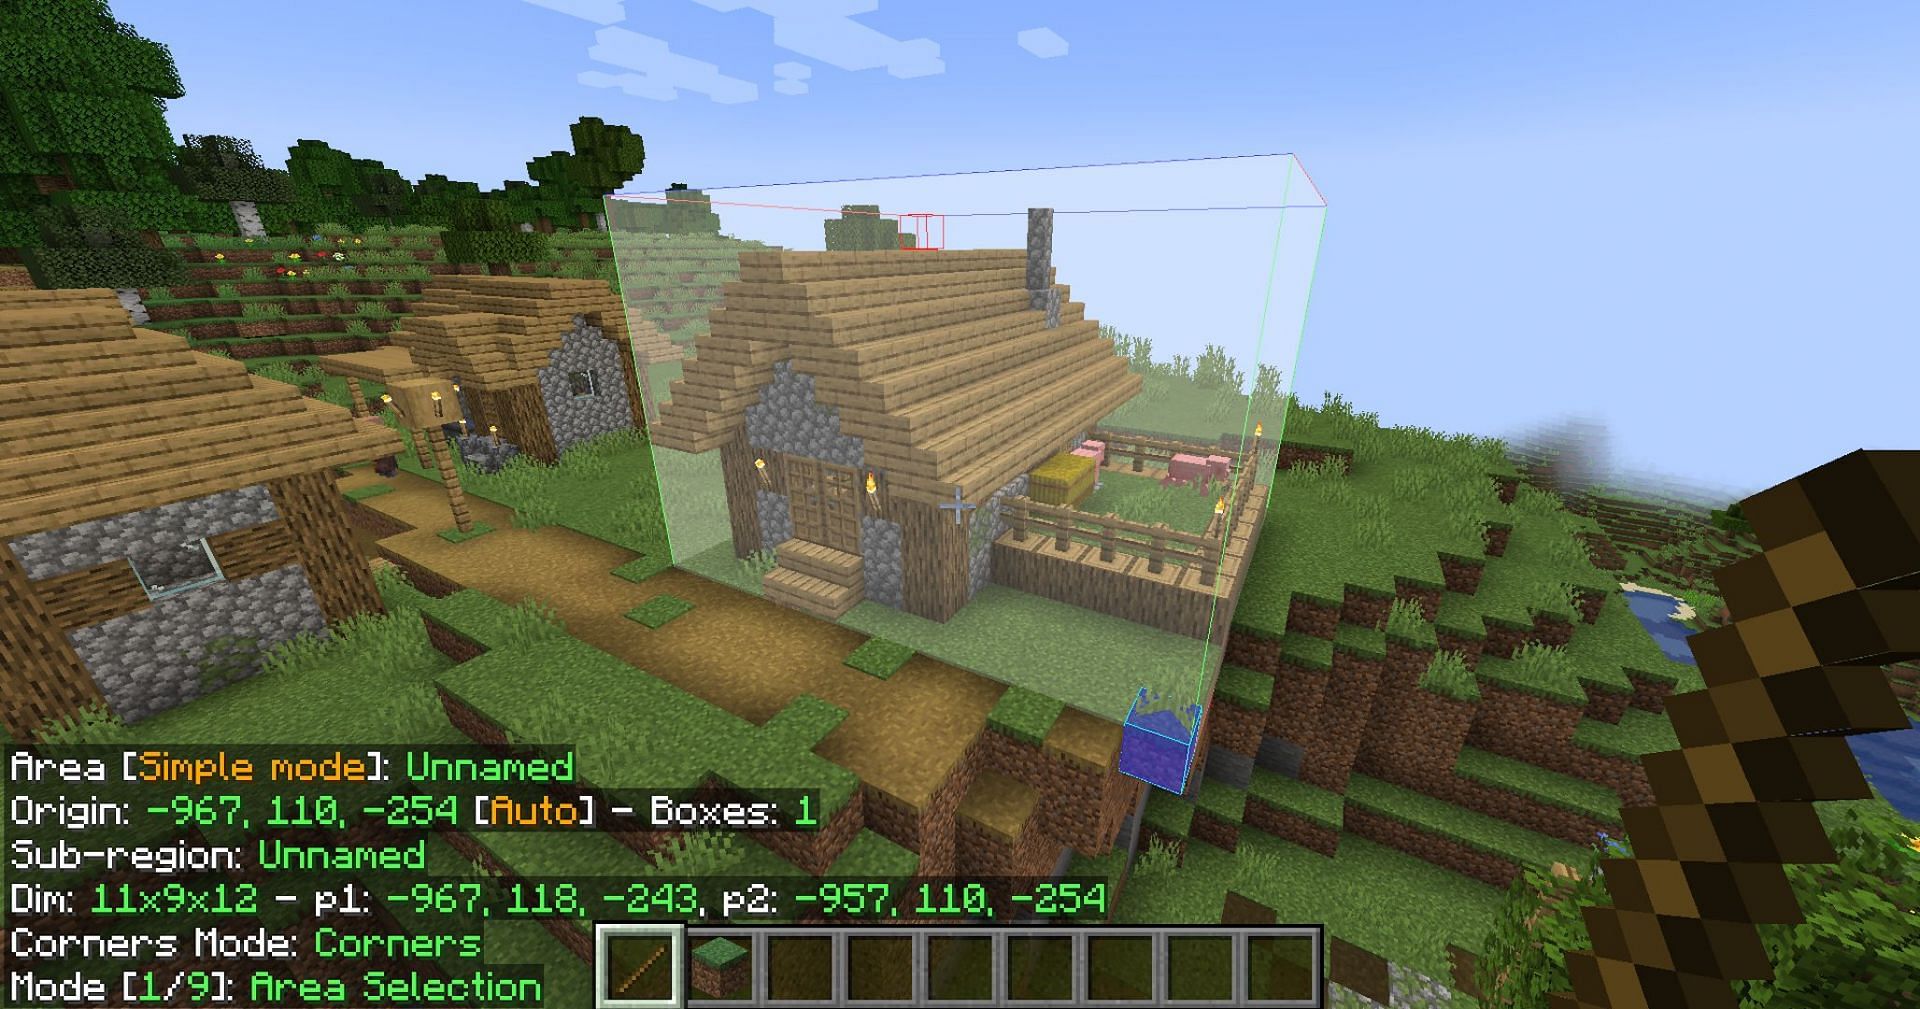 The overlay is super useful for making sure you get the entire build (Image via Mojang)